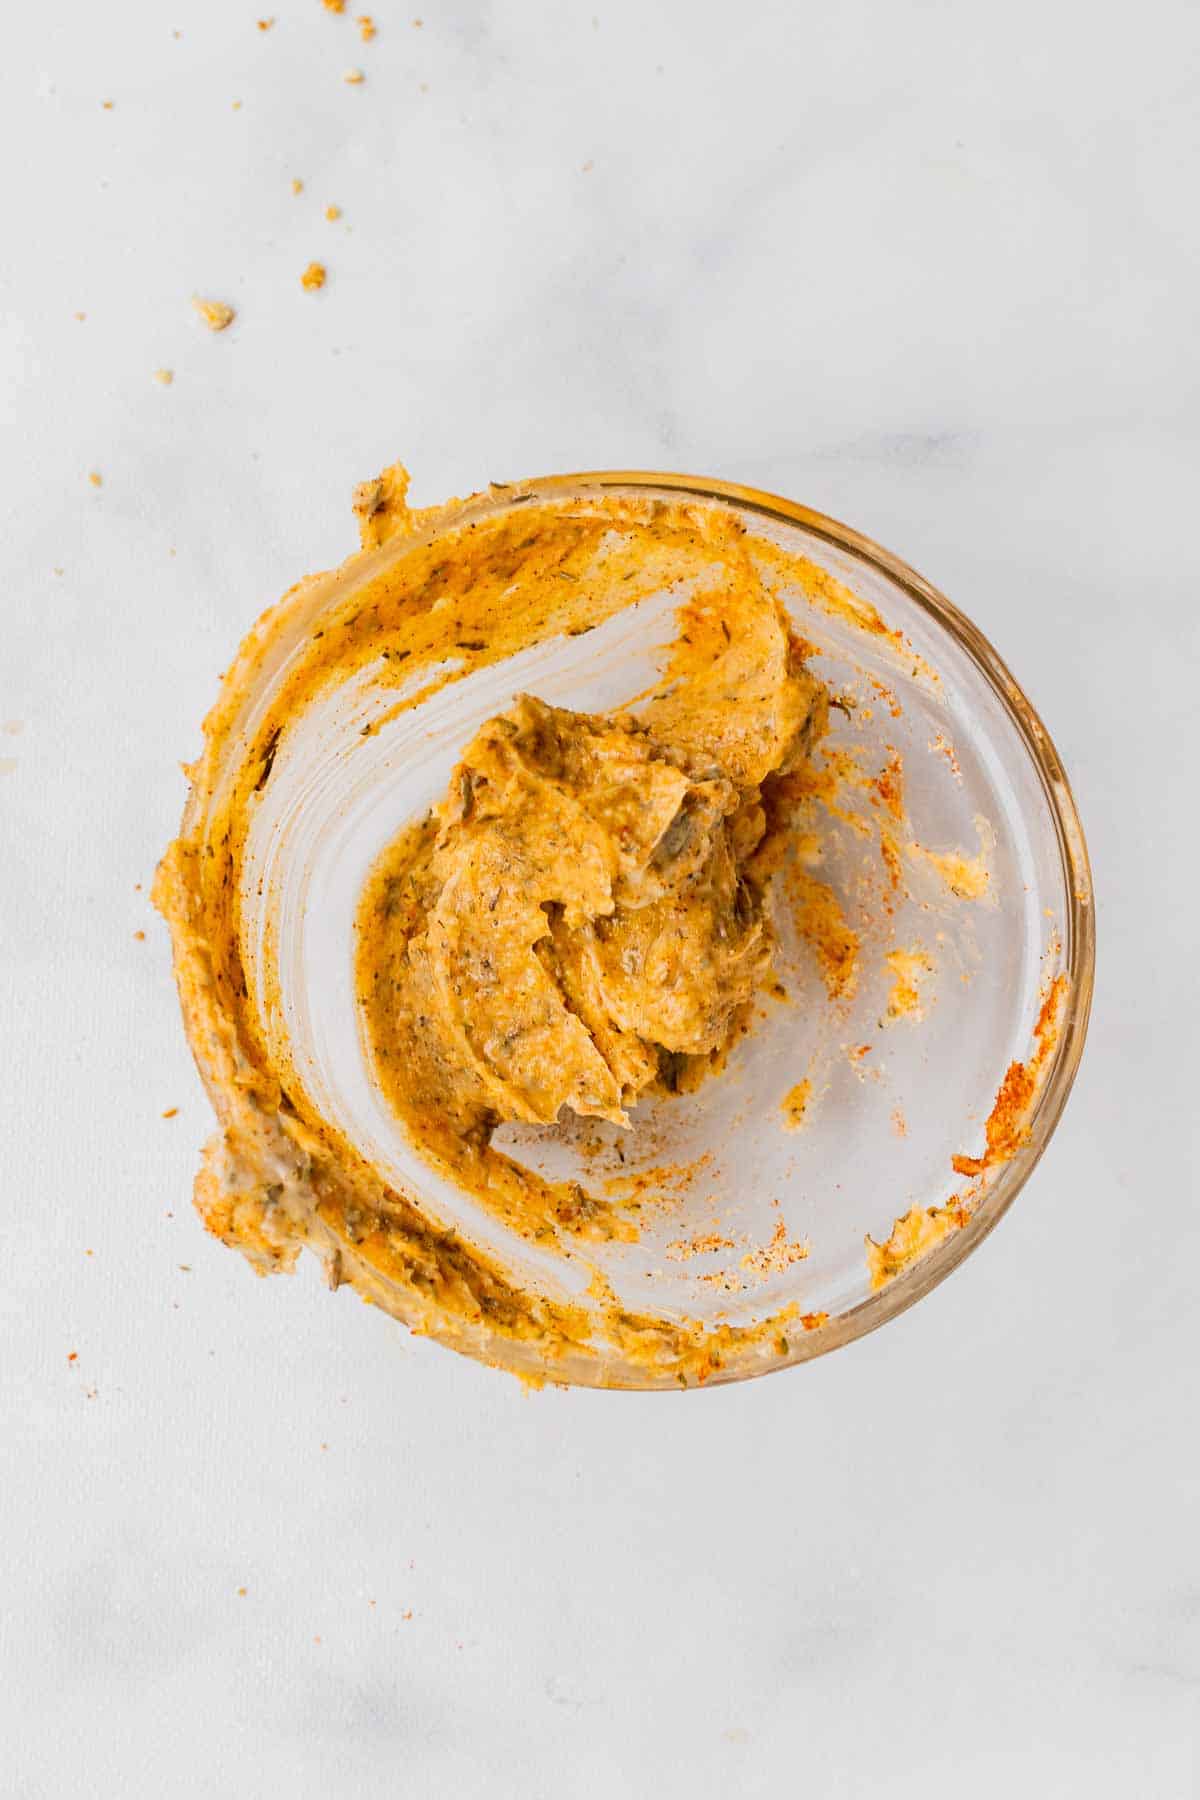 Butter, salt, dried thyme, garlic powder, paprika, and pepper combined into a paste in a ramekin